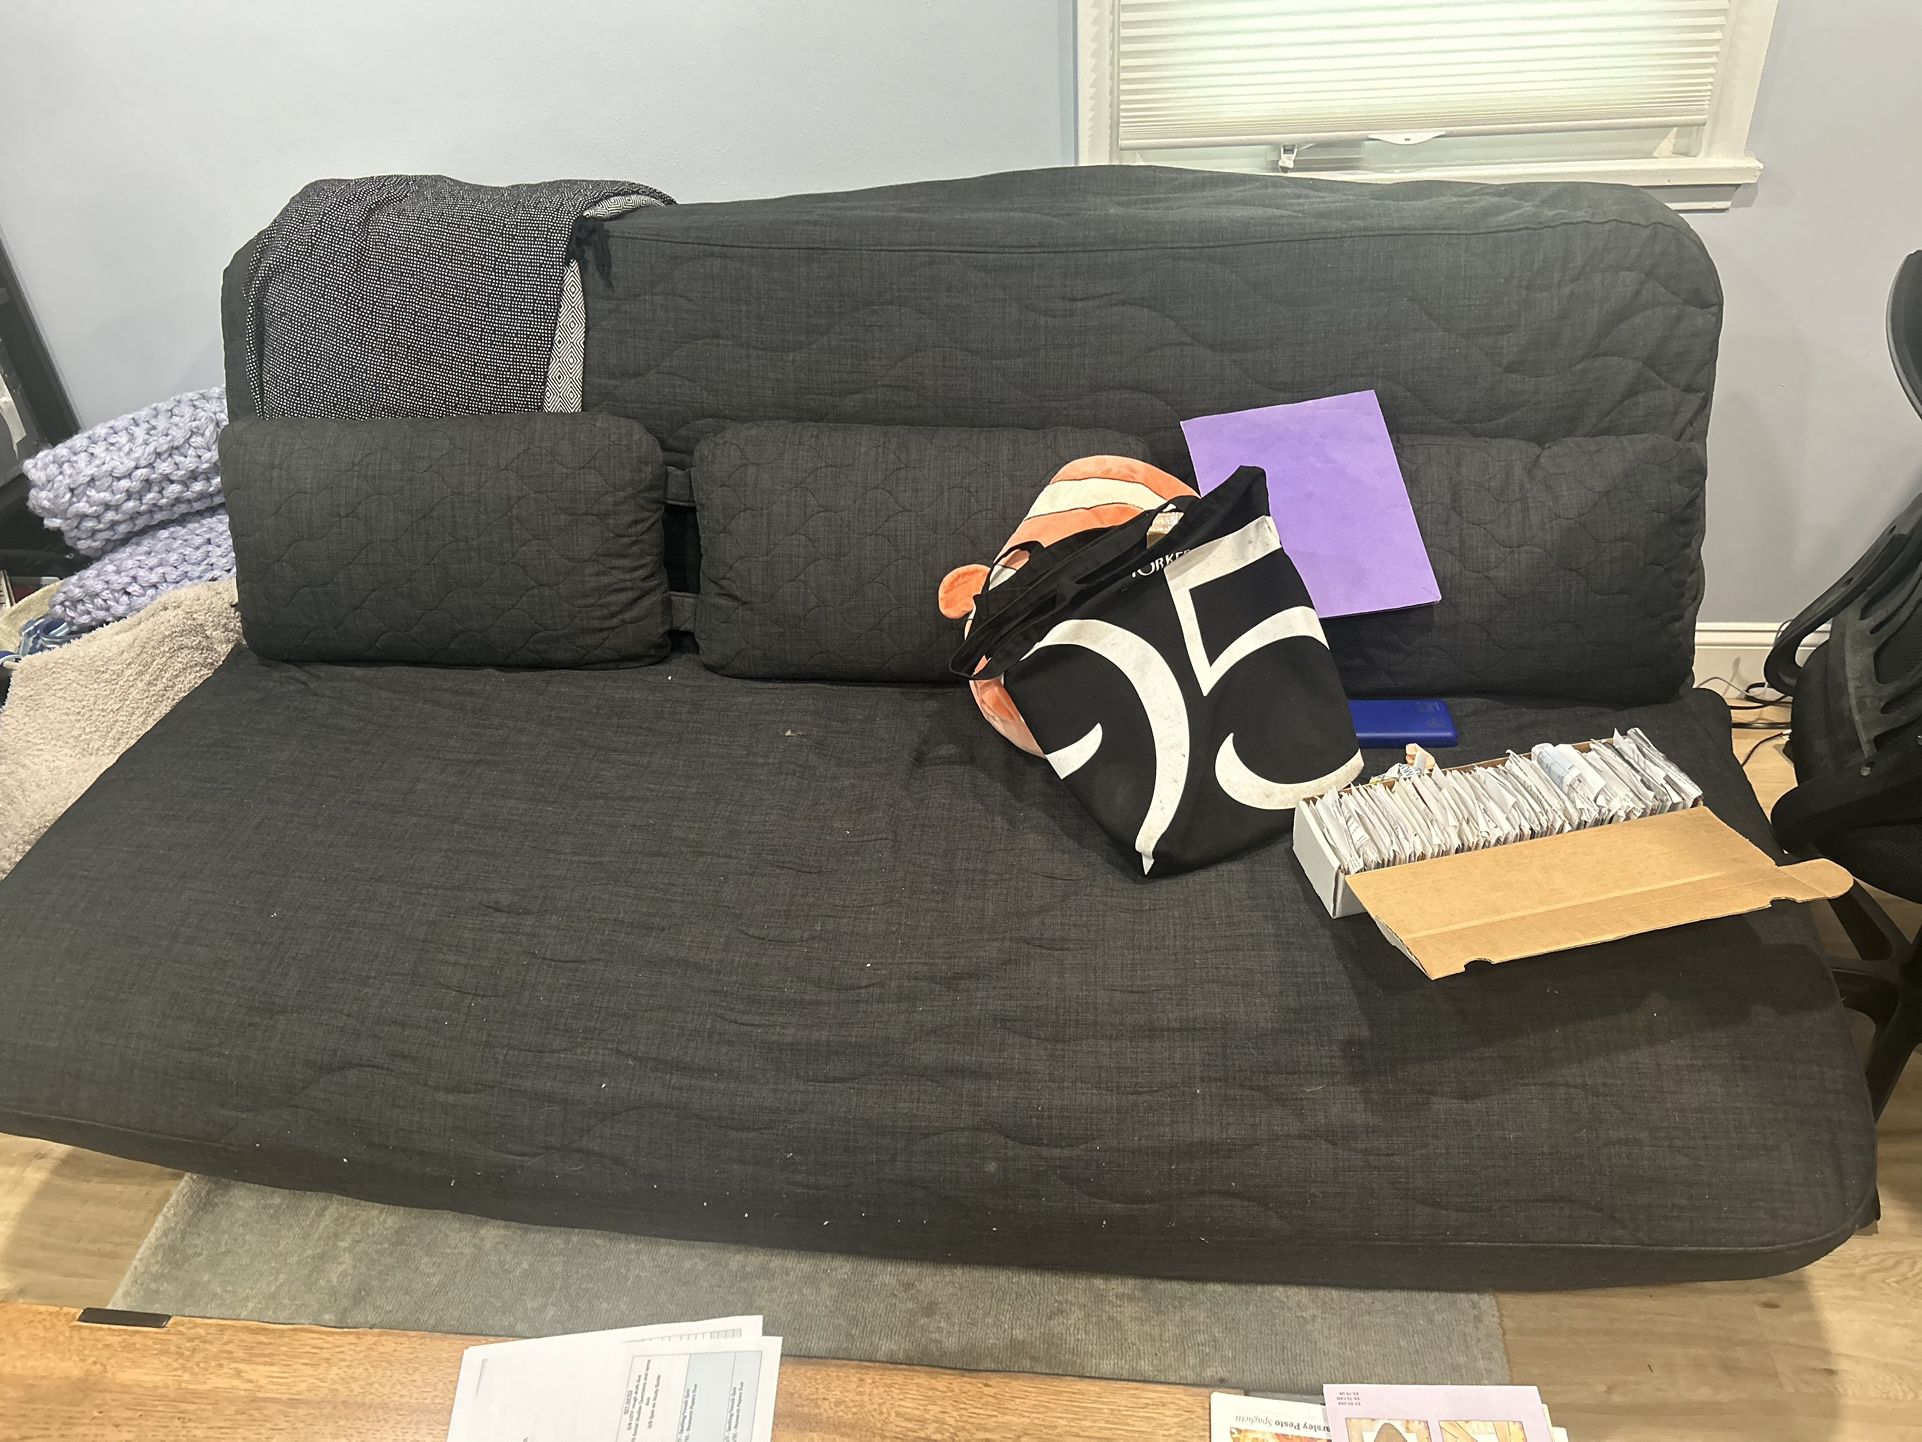 Full Futon With Thick Black Cover 